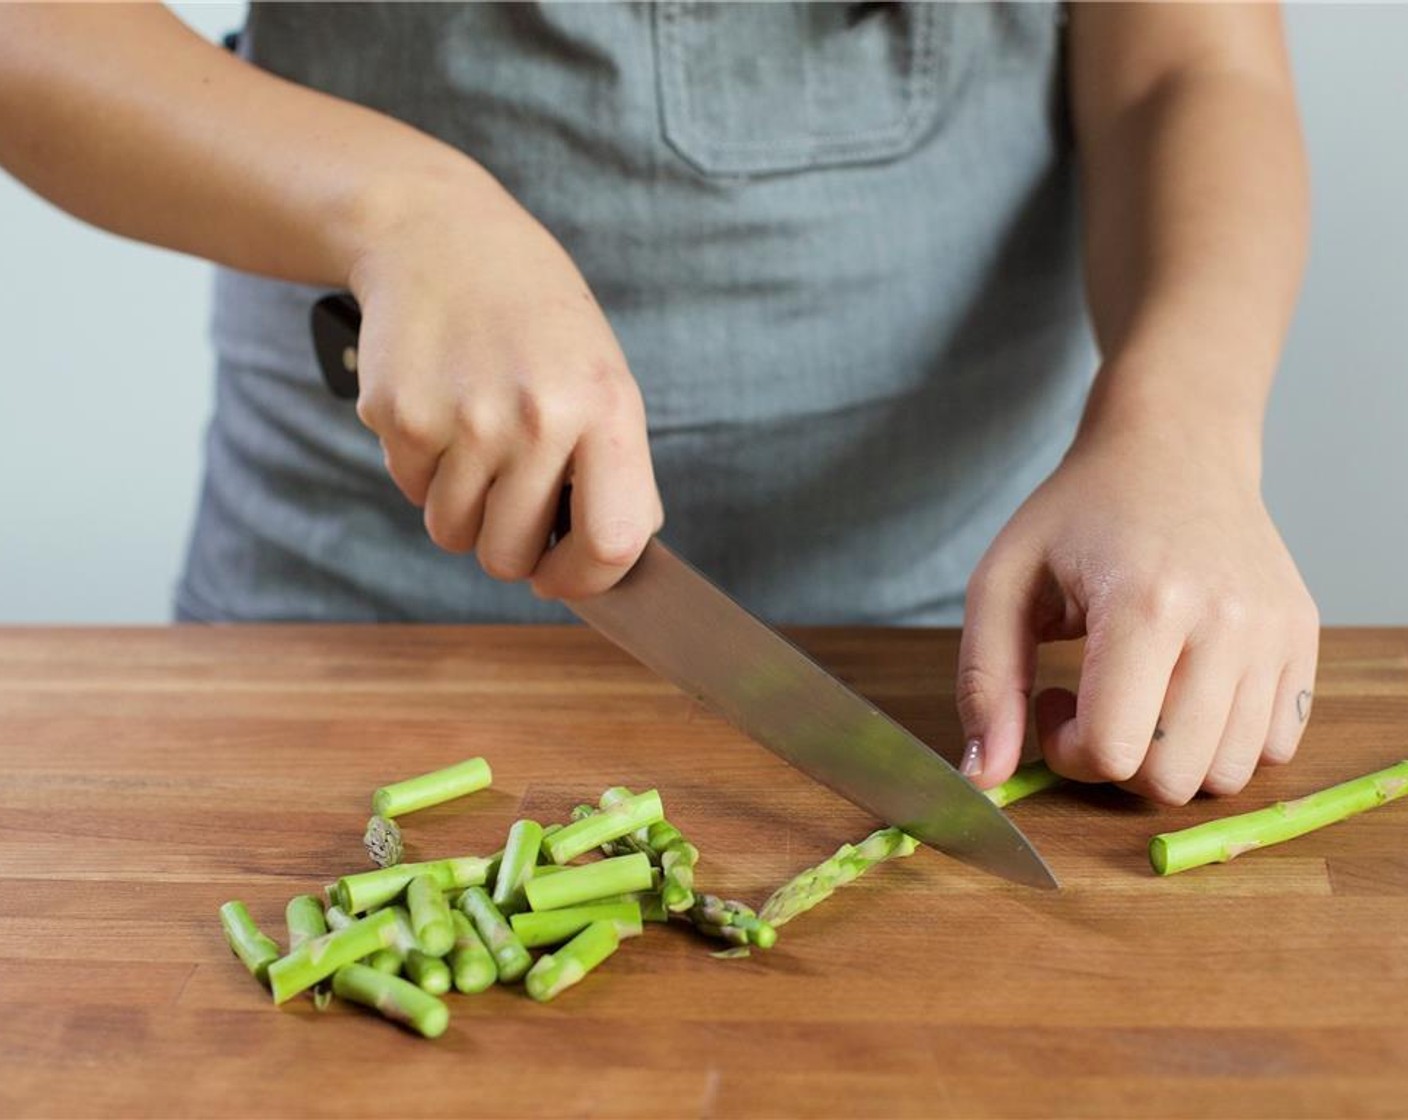 step 3 Trim Asparagus (3/4 cup) by snapping the thicker bottom ends where they break naturally. Cut the asparagus into one inch pieces, and set aside. Drain the Artichoke Hearts (2/3 cup) and set aside.